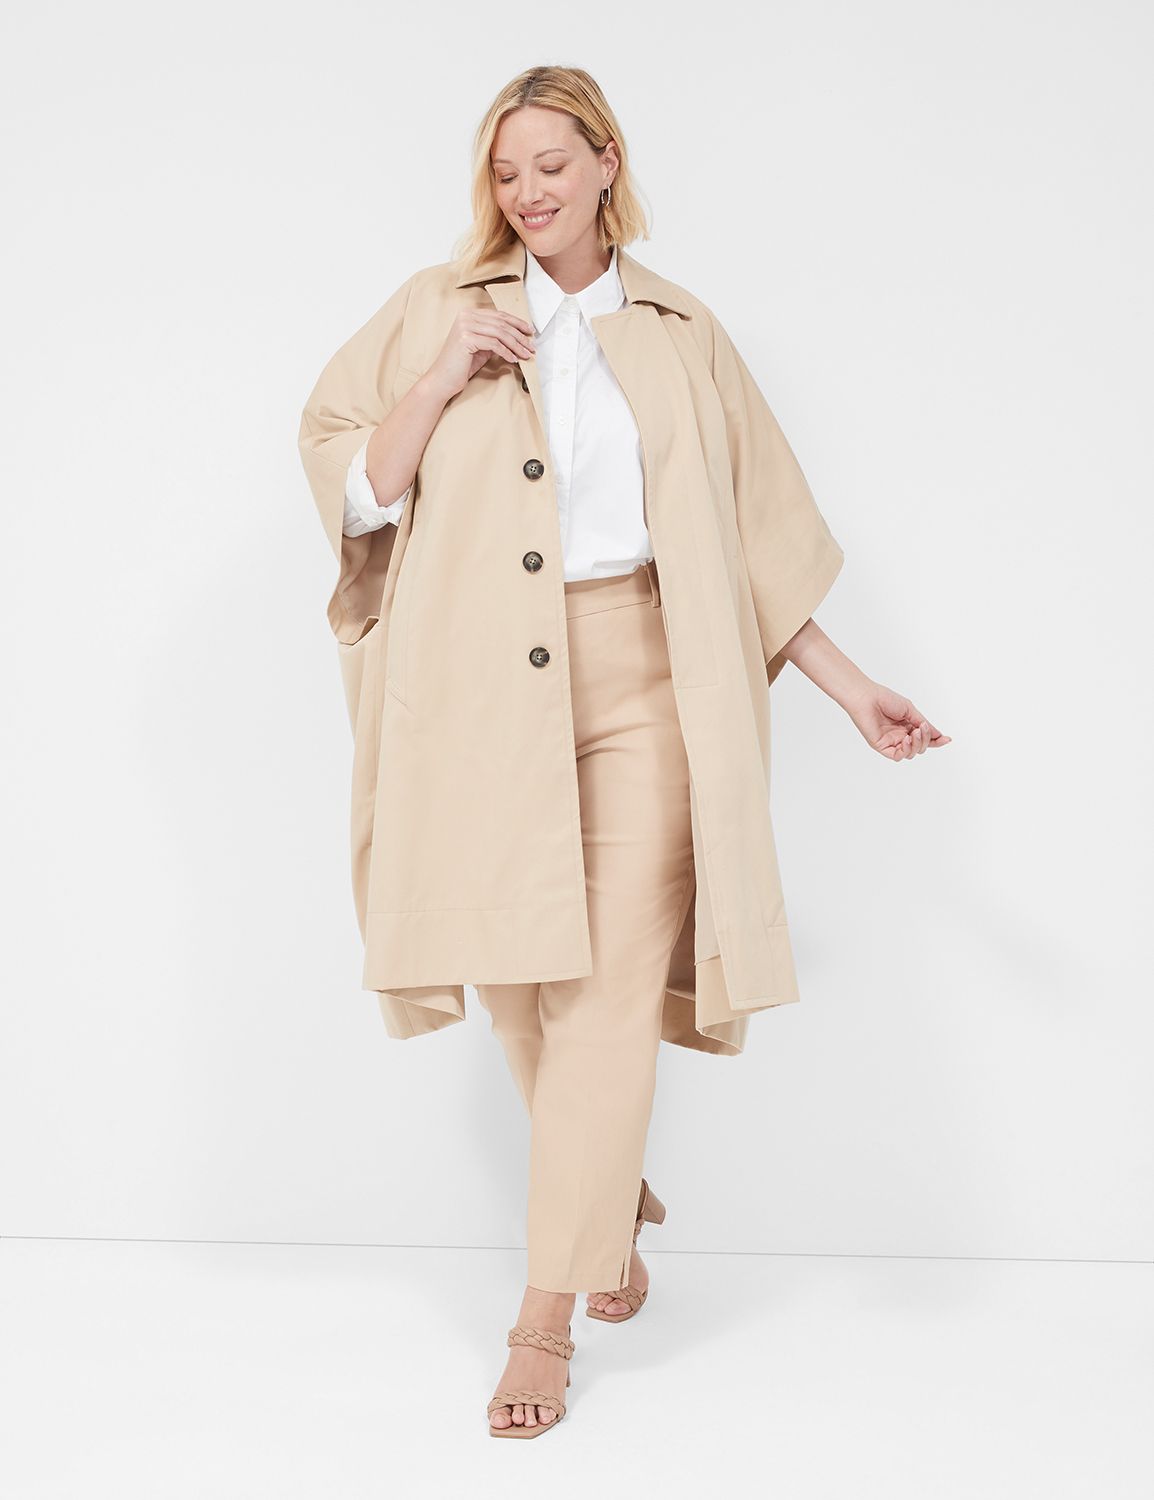 Lane Bryant - Take 50% Off Jackets and Outerwear.